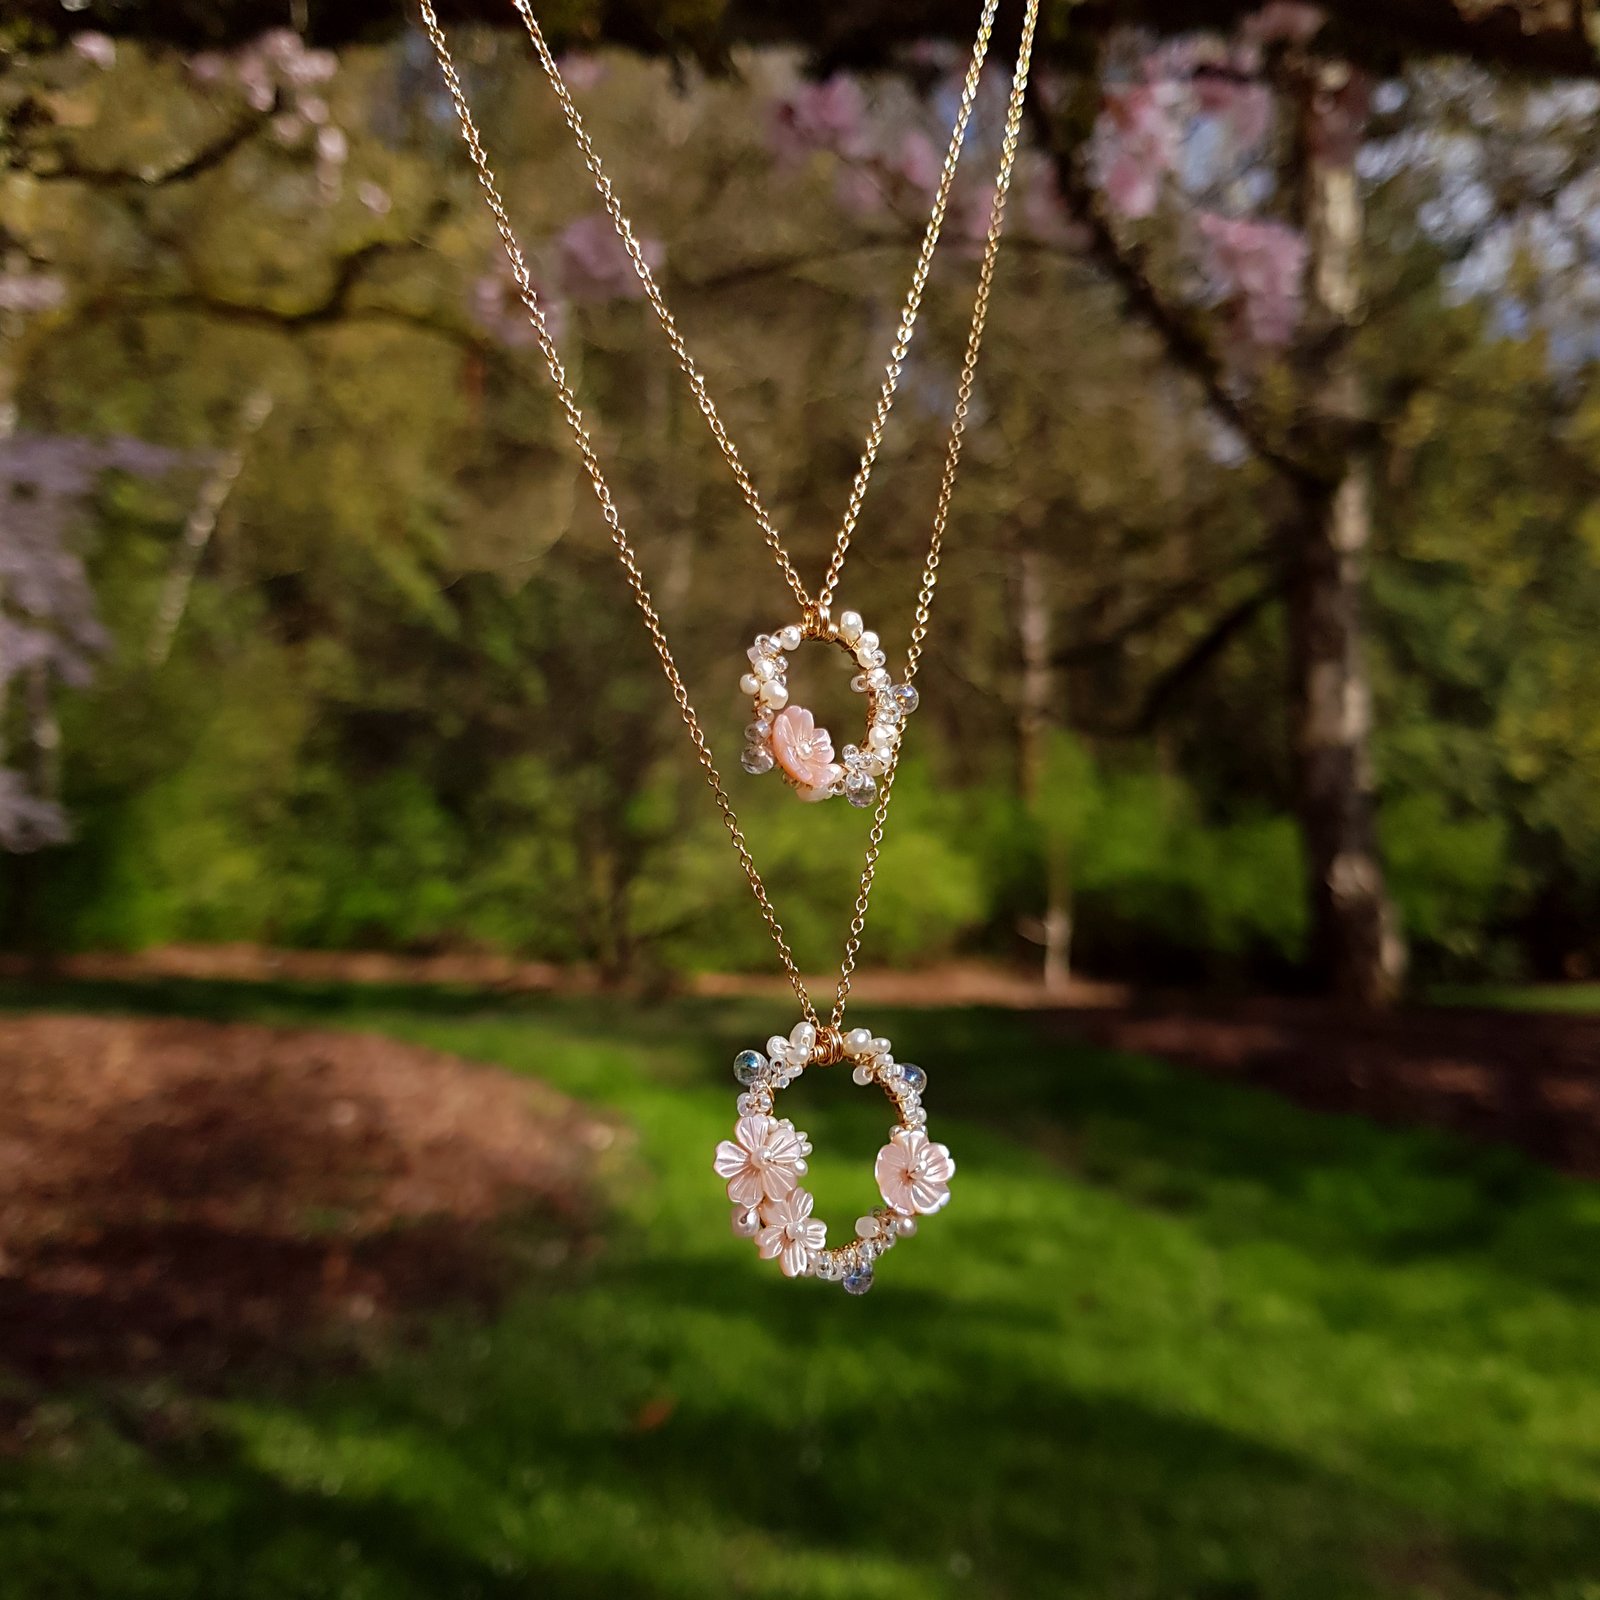 Cherry Blossom Necklace | Bisoulovely